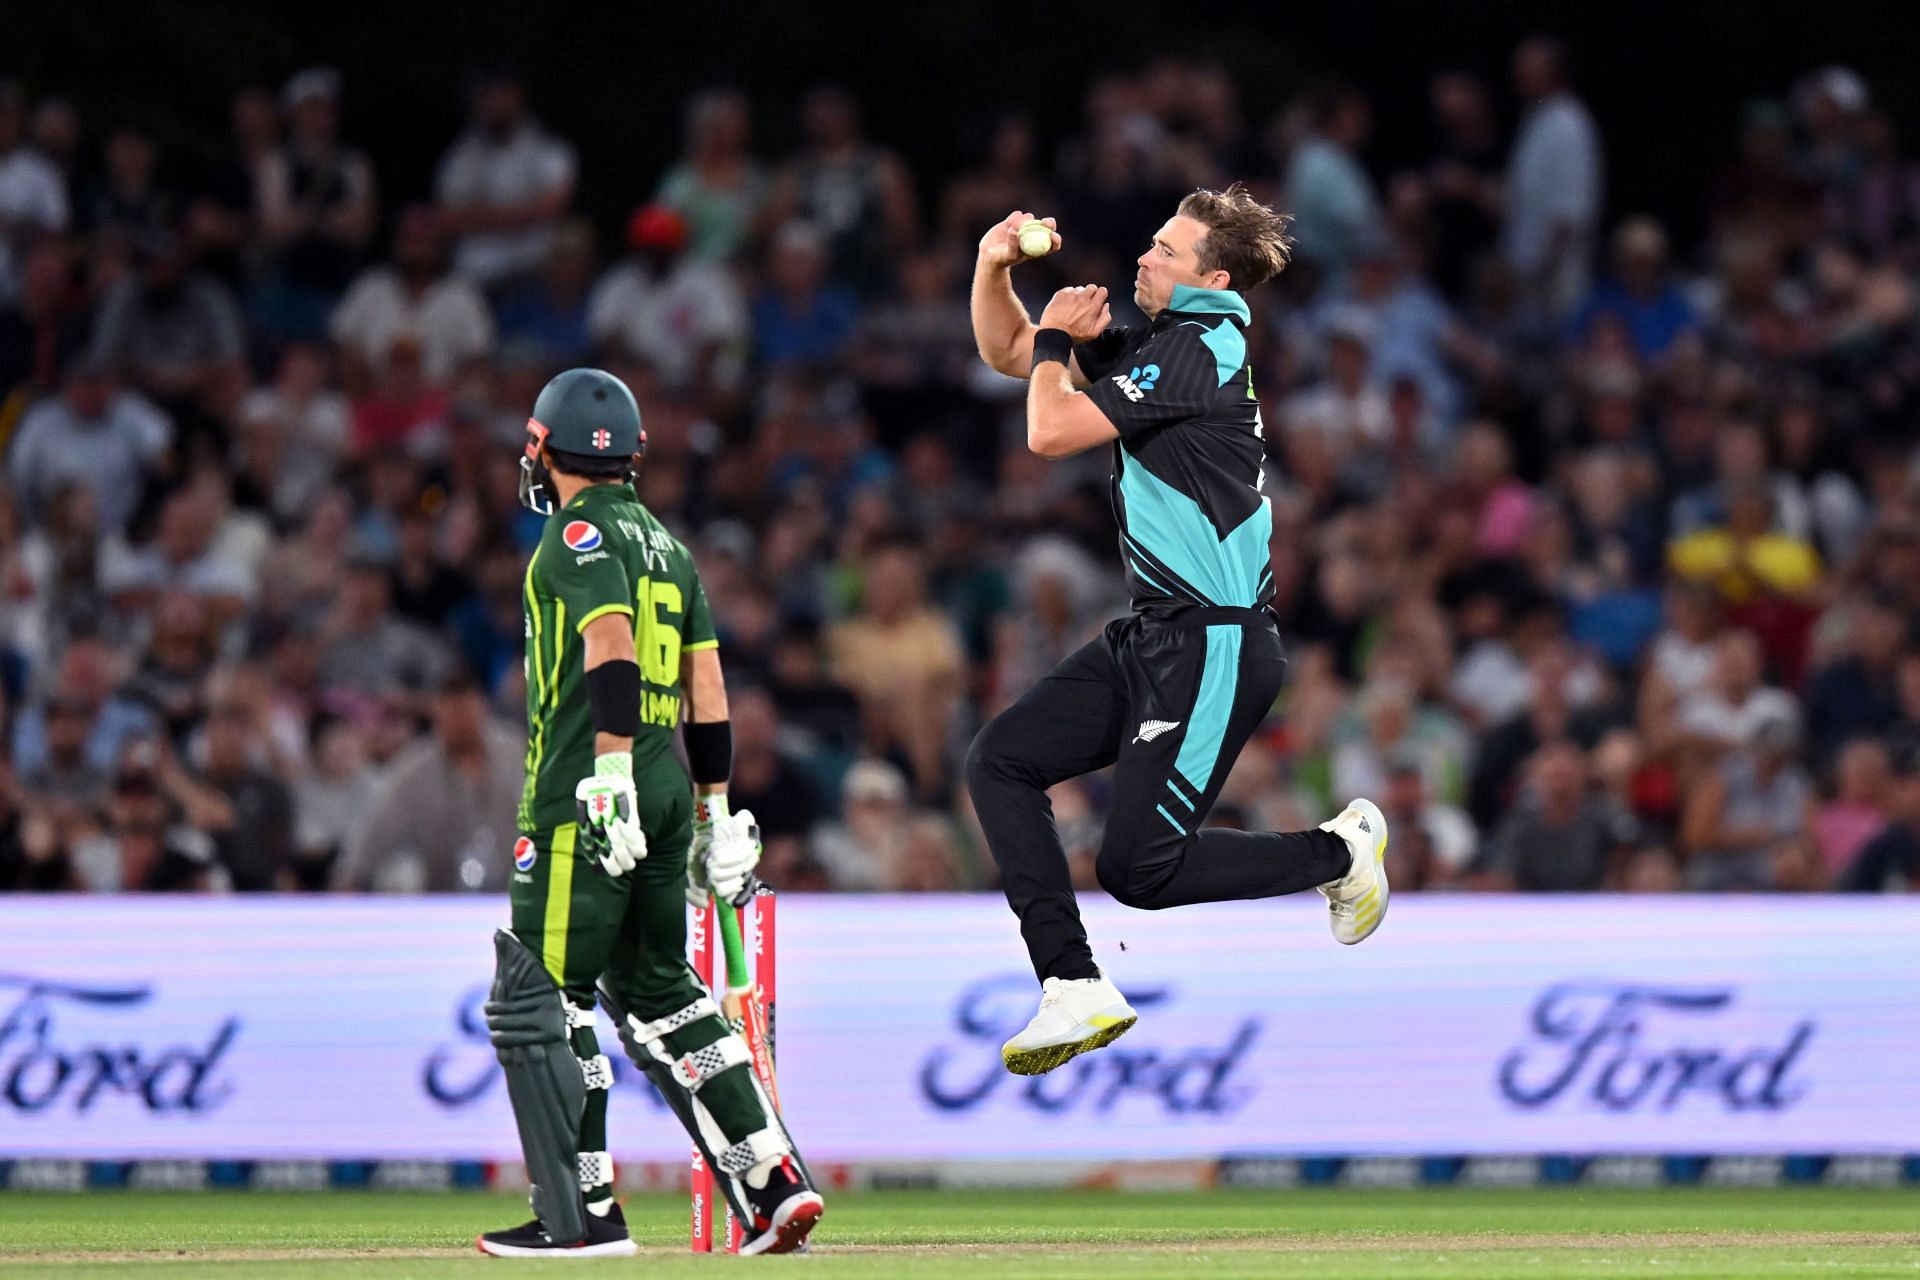 Tim Southee bowling in a match against Pakistan. (Pic: Getty Images)